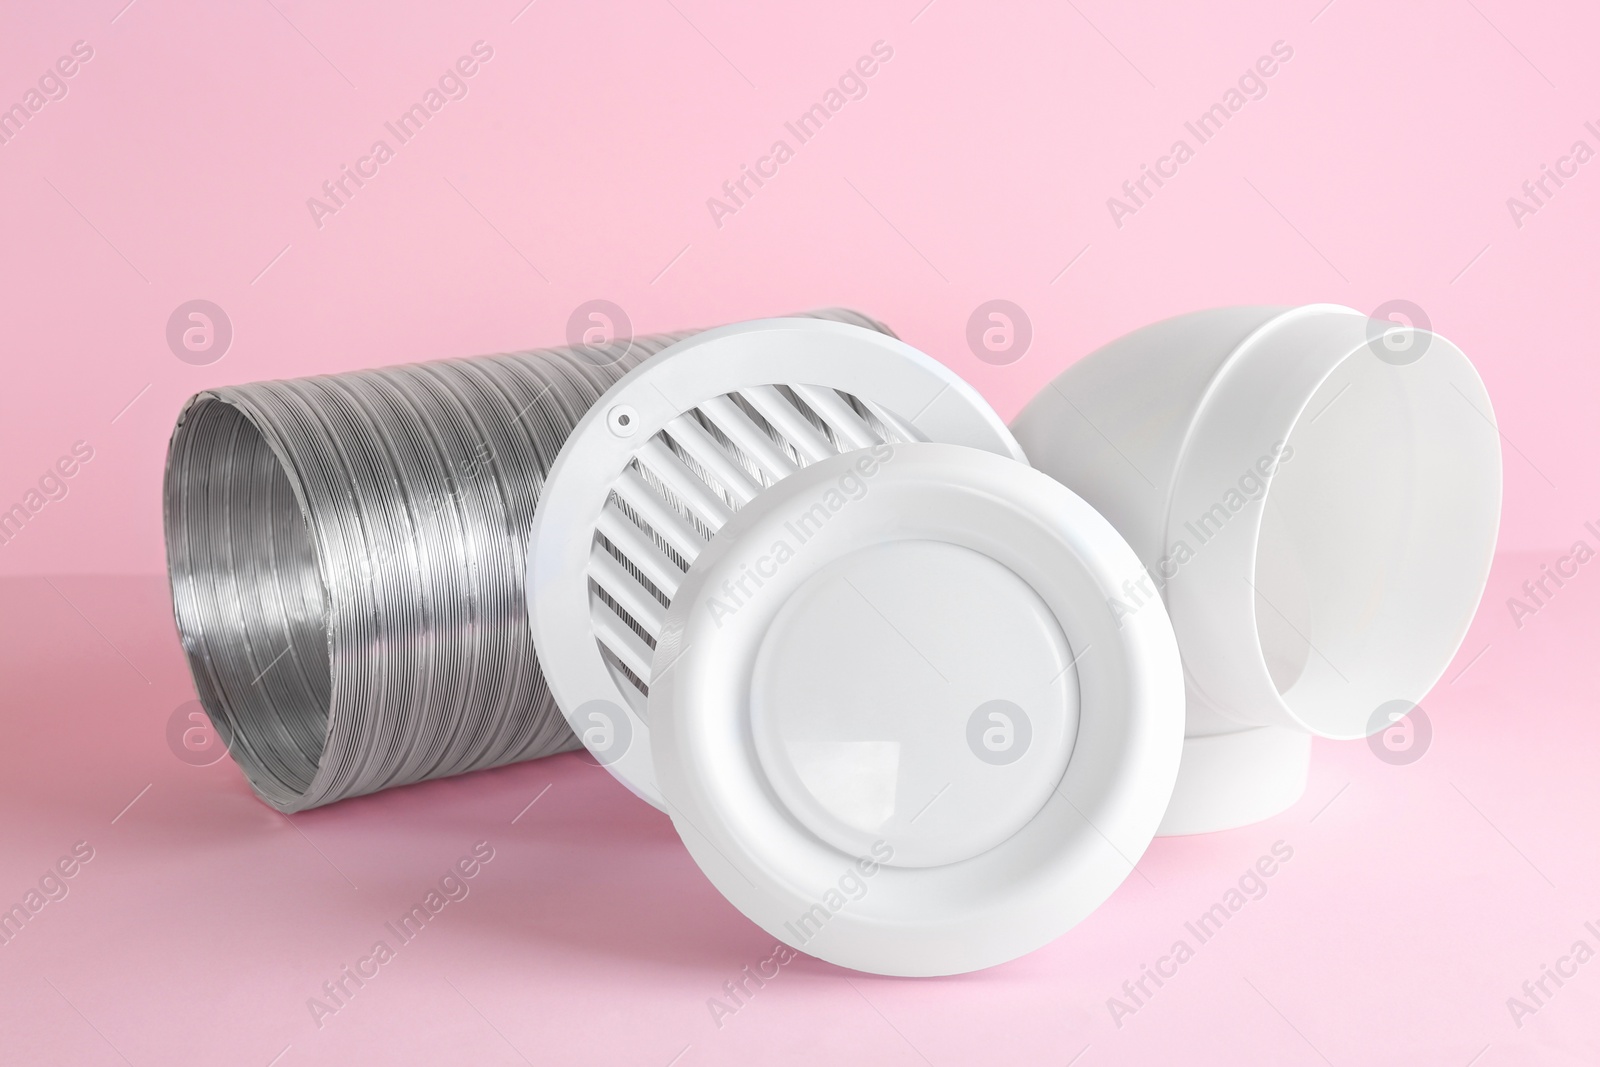 Photo of Parts of home ventilation system on pink background